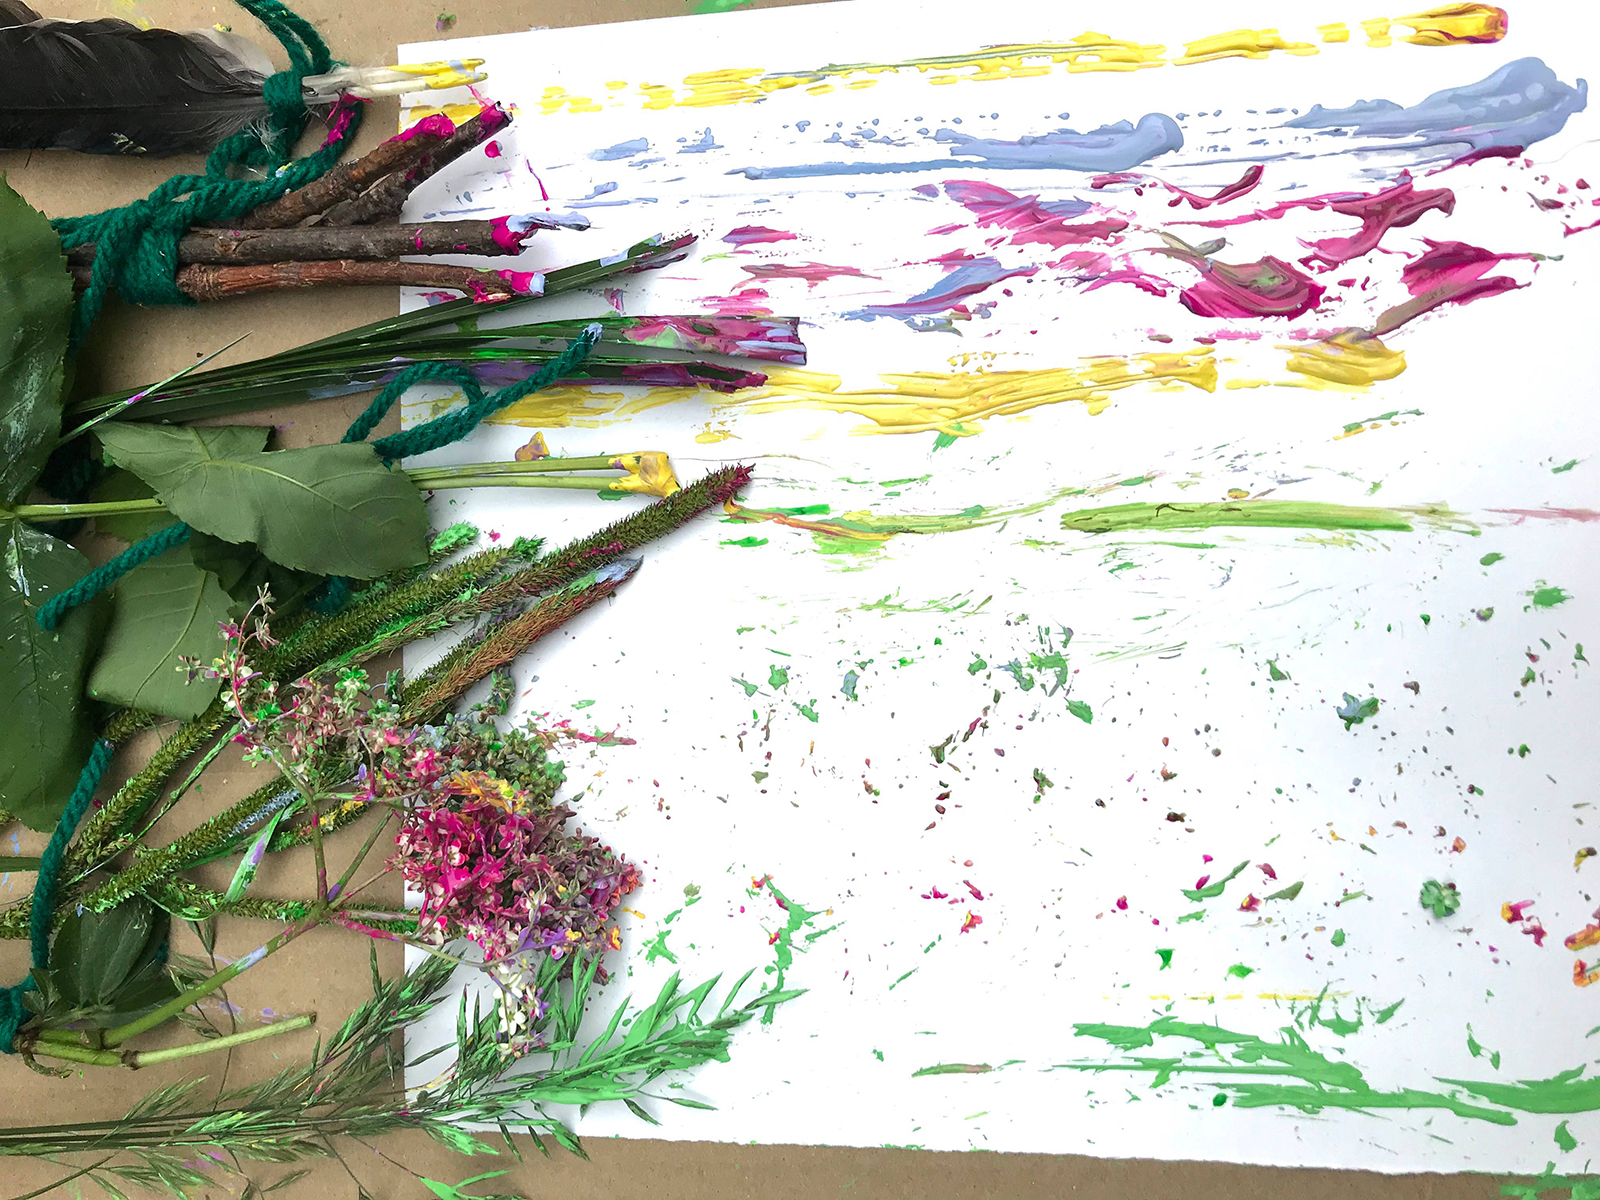 Turn those Toddlers Painting into Wildlife Art - Mother Natured